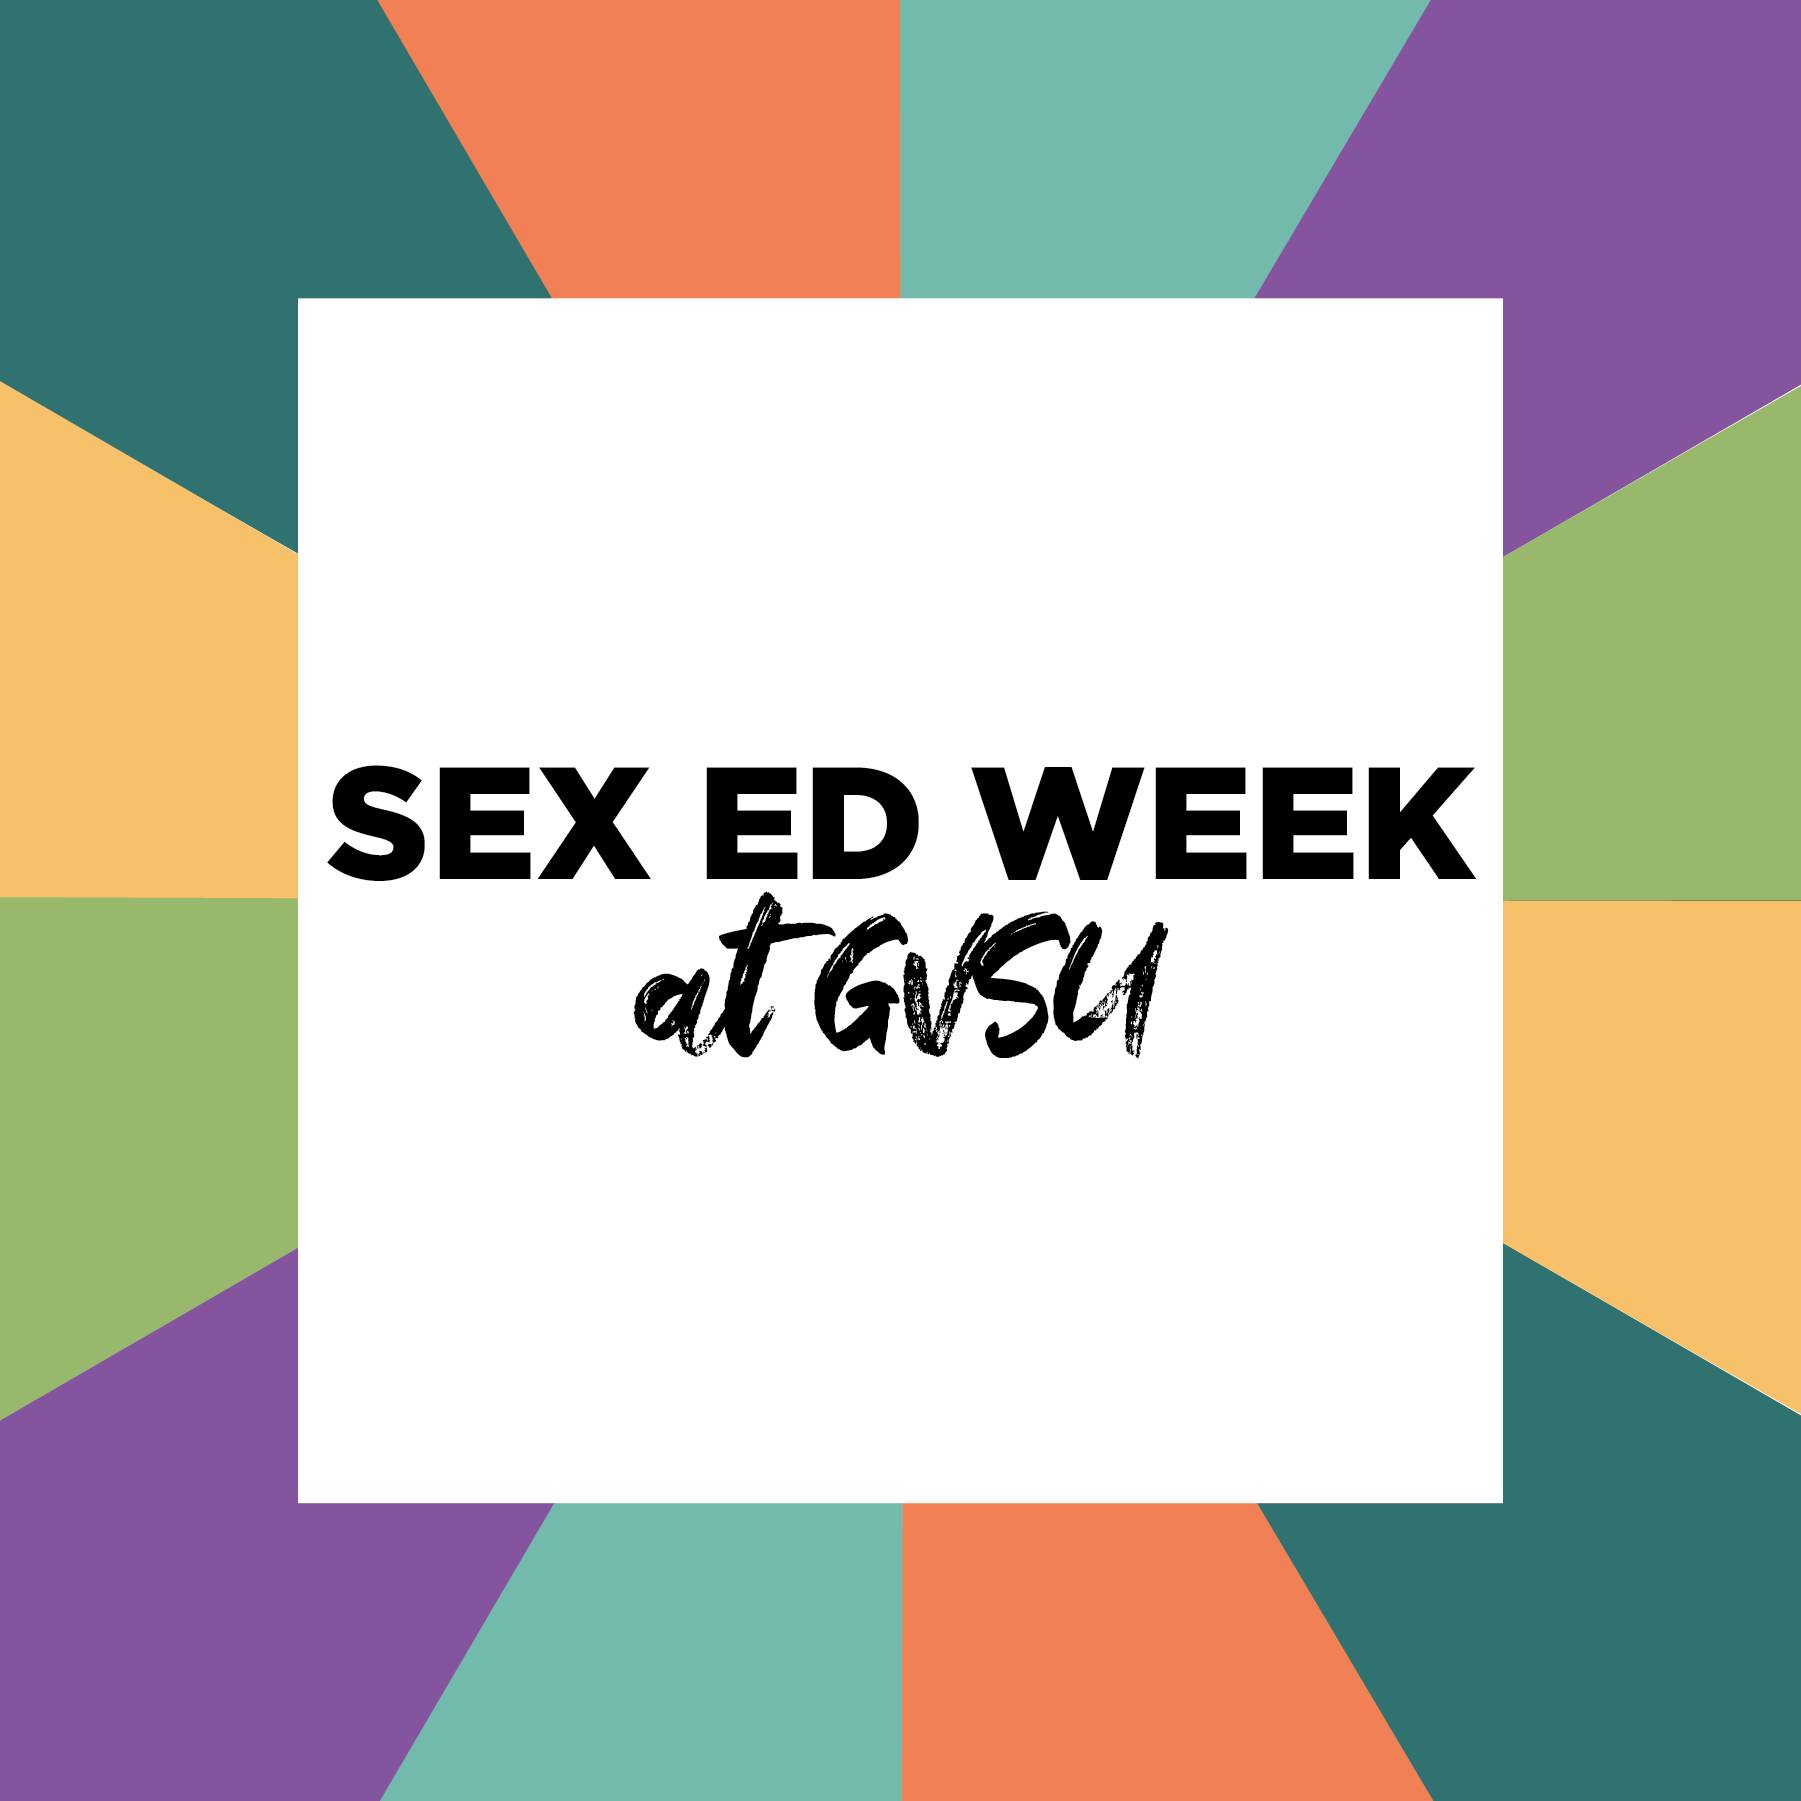 Colorful boarder with GVSU sex ed week in center